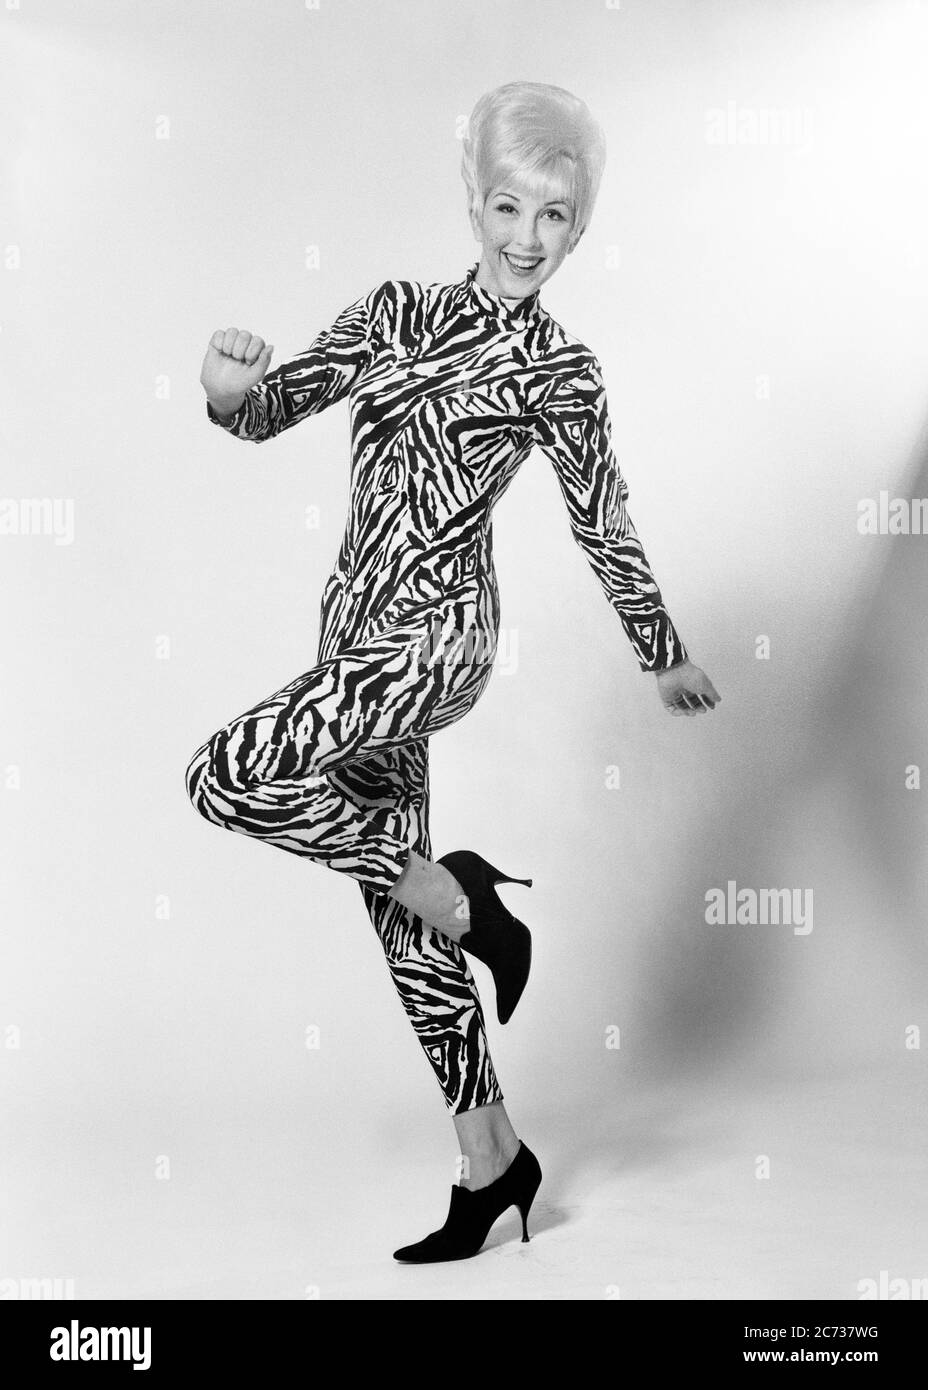 1960s SMILING BLONDE WOMAN BOUFFANT HAIRDO WEARING ANIMAL PRINT BODY SUIT DANCING POSING - asp jo7398 ASP001 HARS SATISFACTION CELEBRATION FEMALES STUDIO SHOT HEALTHINESS HOME LIFE COPY SPACE FULL-LENGTH LADIES PHYSICAL FITNESS PERSONS TRENDY ENTERTAINMENT CONFIDENCE B&W BEEHIVE EYE CONTACT HUMOROUS HAPPINESS CHEERFUL HIP LEISURE STYLES FUNKY JUMPSUIT SEX EXCITEMENT HAIRSTYLE SEDUCTIVE TREND COMICAL PRIDE OCCUPATIONS POSING SENSUAL SMILES COMEDY JOYFUL STYLISH GROOVY SEXUALLY MODELLING ATTRACTIVE EXCITING FASHIONS HAIRDO MID-ADULT MID-ADULT WOMAN MODELING POSE TEASED YOUNG ADULT WOMAN ALLURING Stock Photo